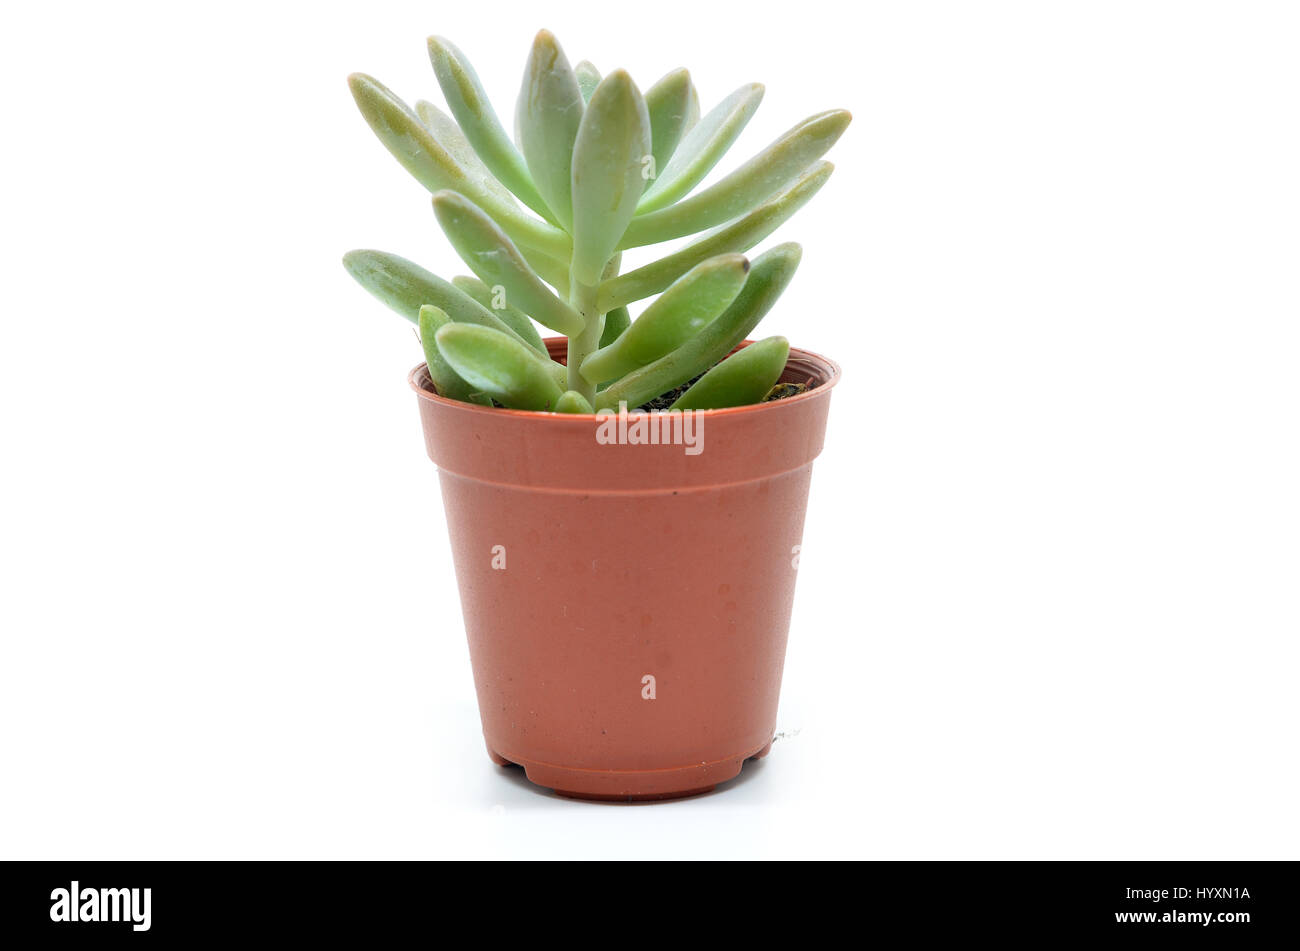 Succulent plant in pot isolated on white background Stock Photo